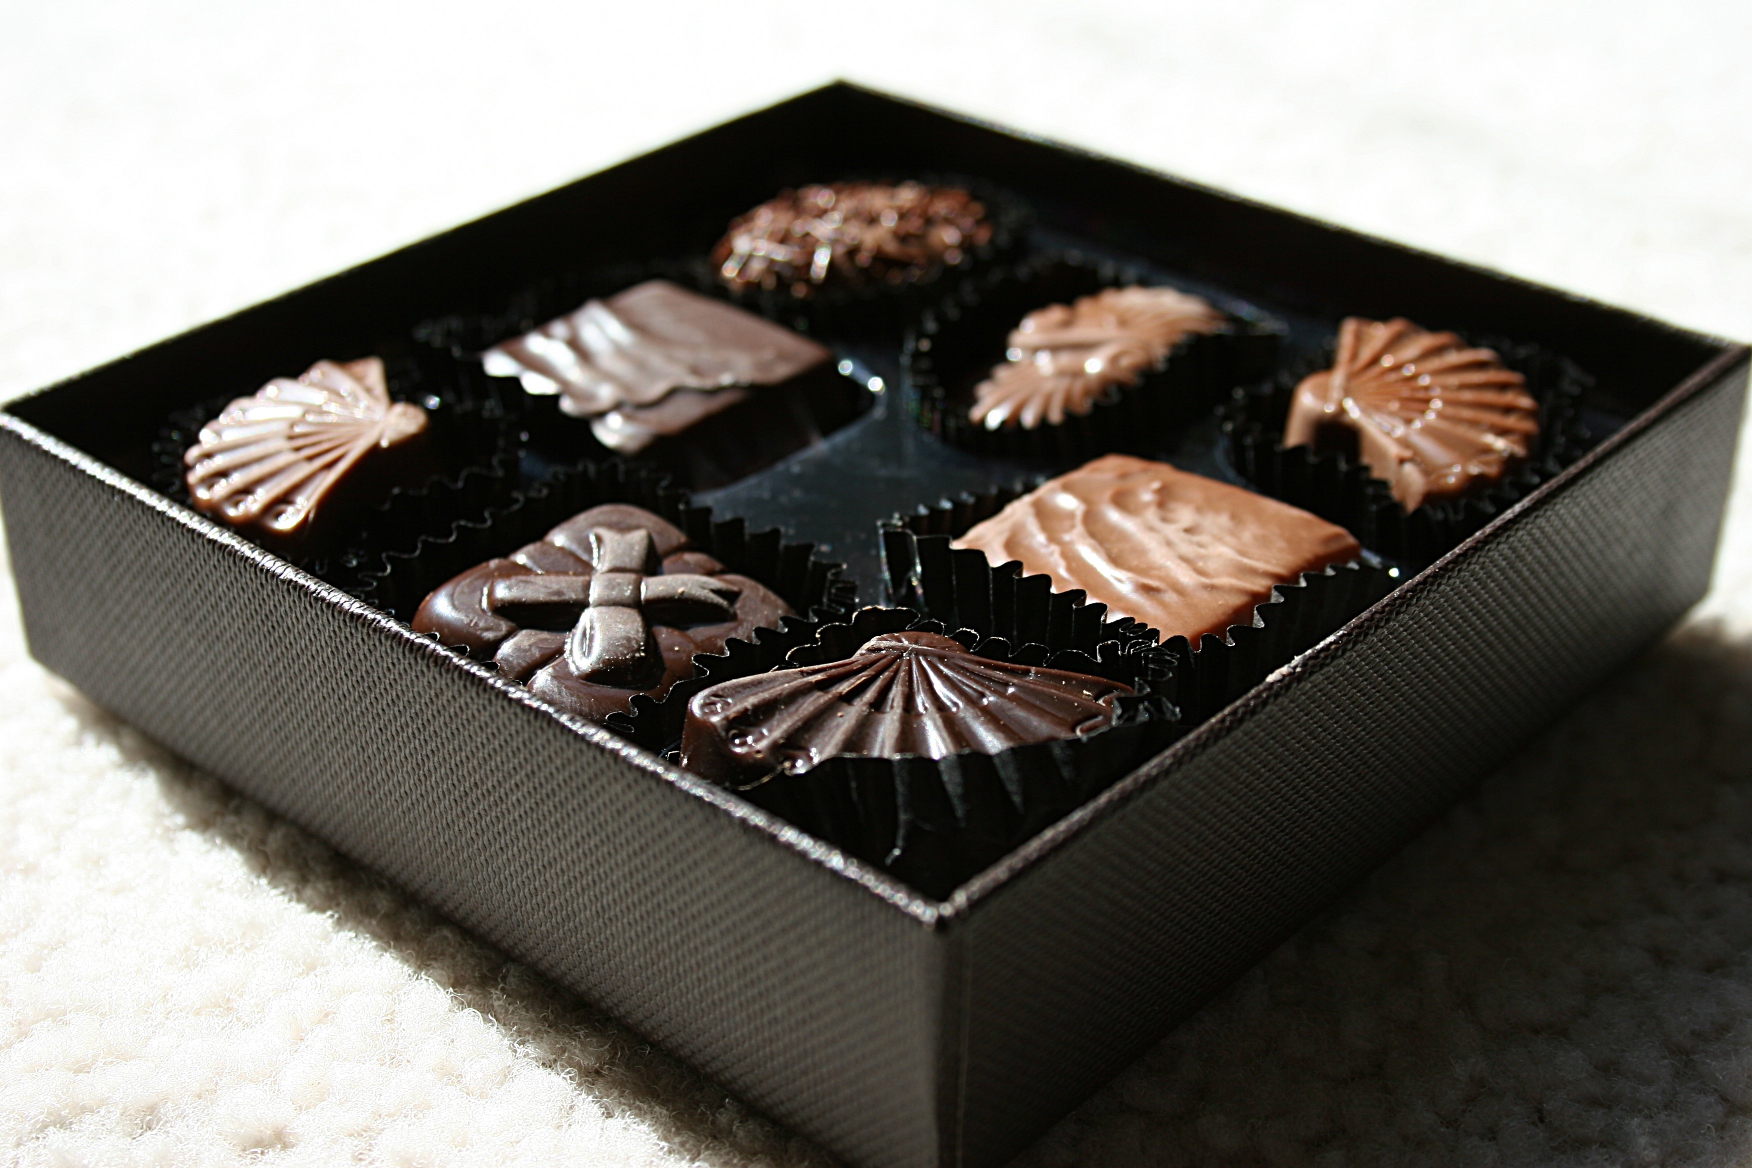 You can't go wrong with chocolate, like this box from my daughter Miranda on Mother's Day.